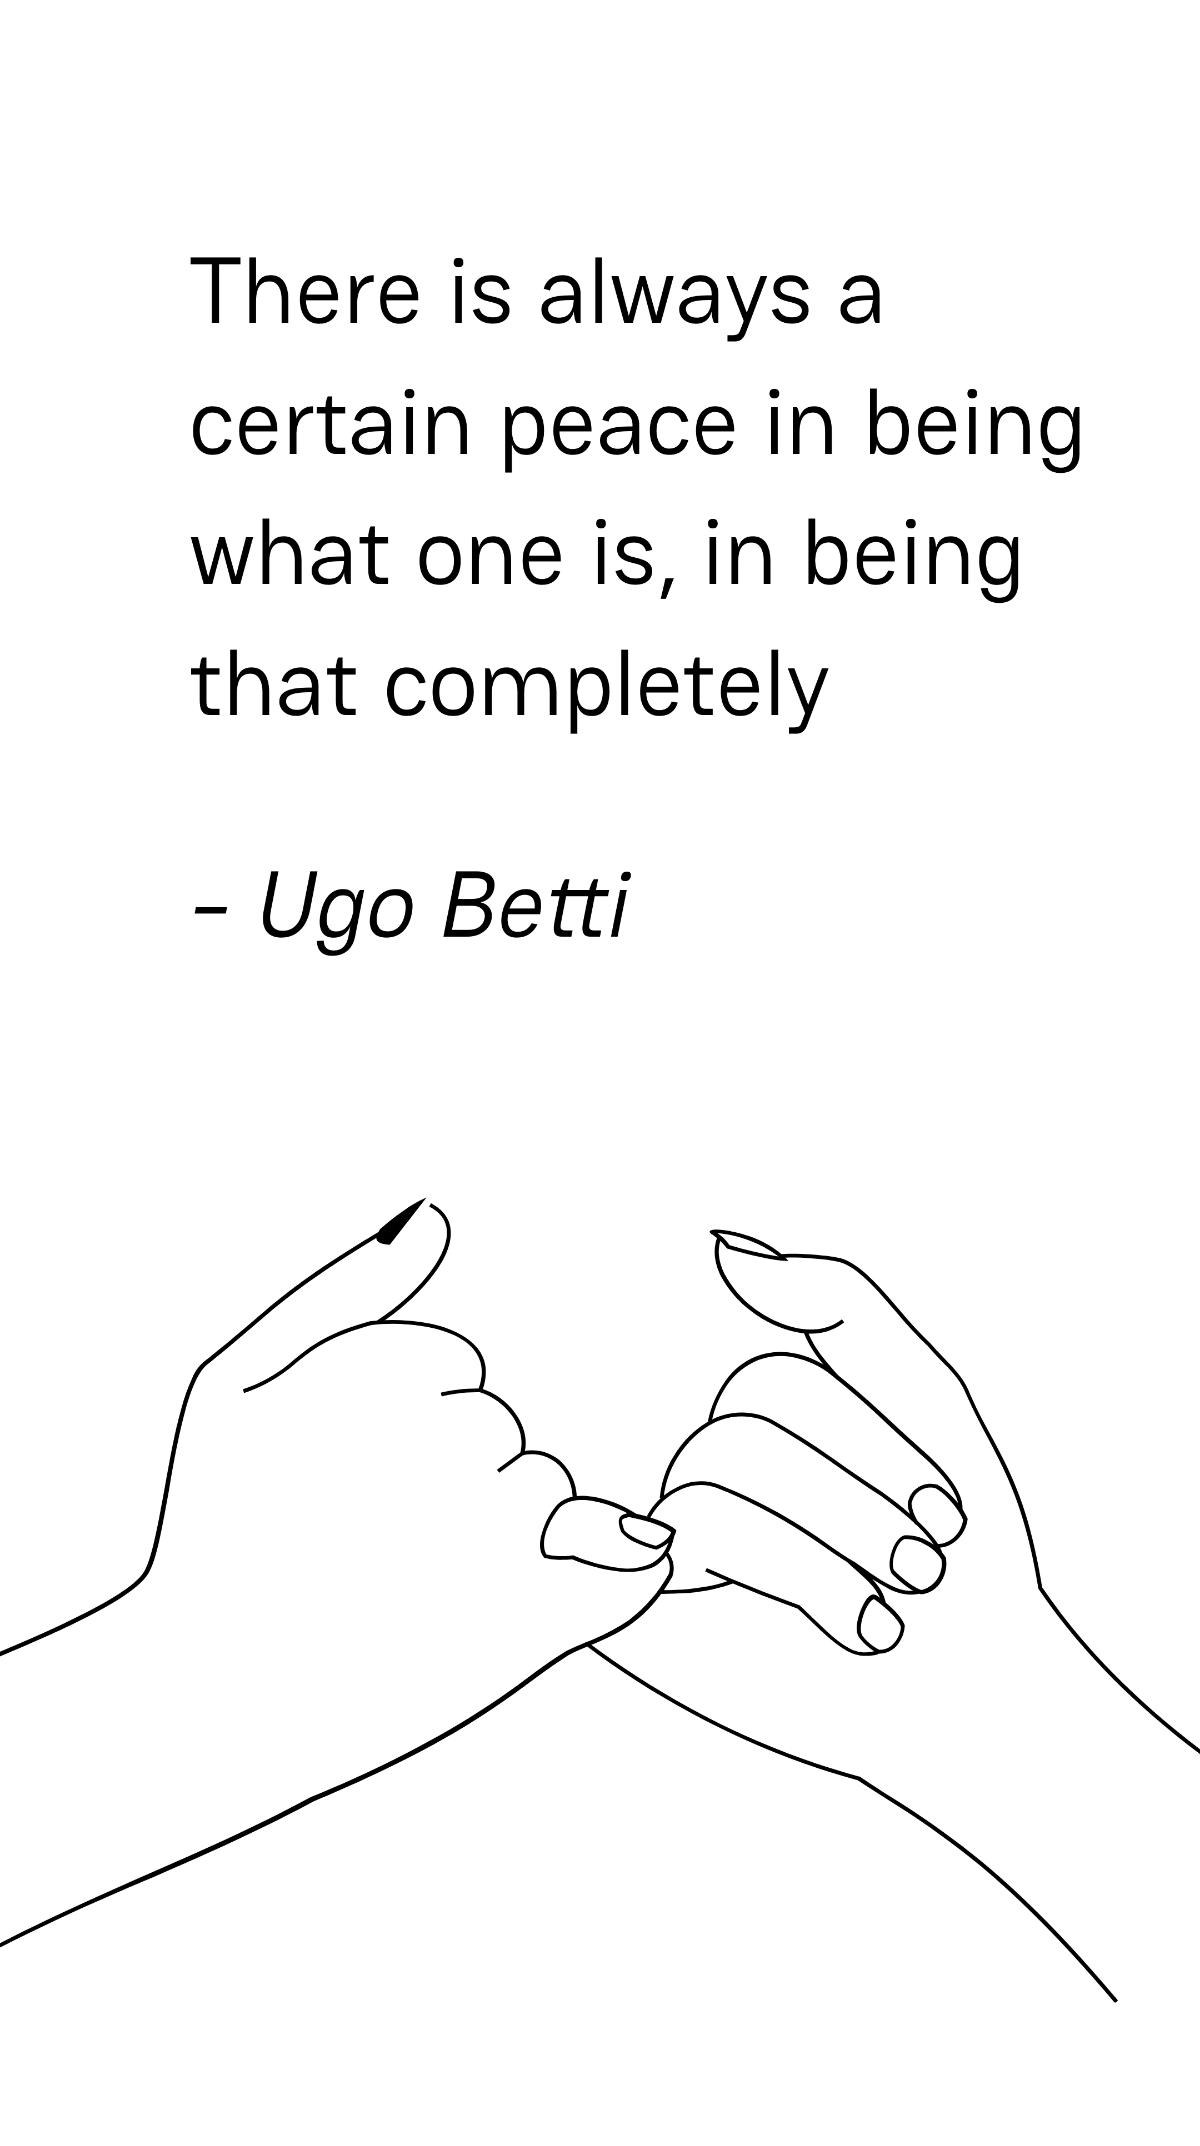 Ugo Betti - There is always a certain peace in being what one is, in being that completely Template